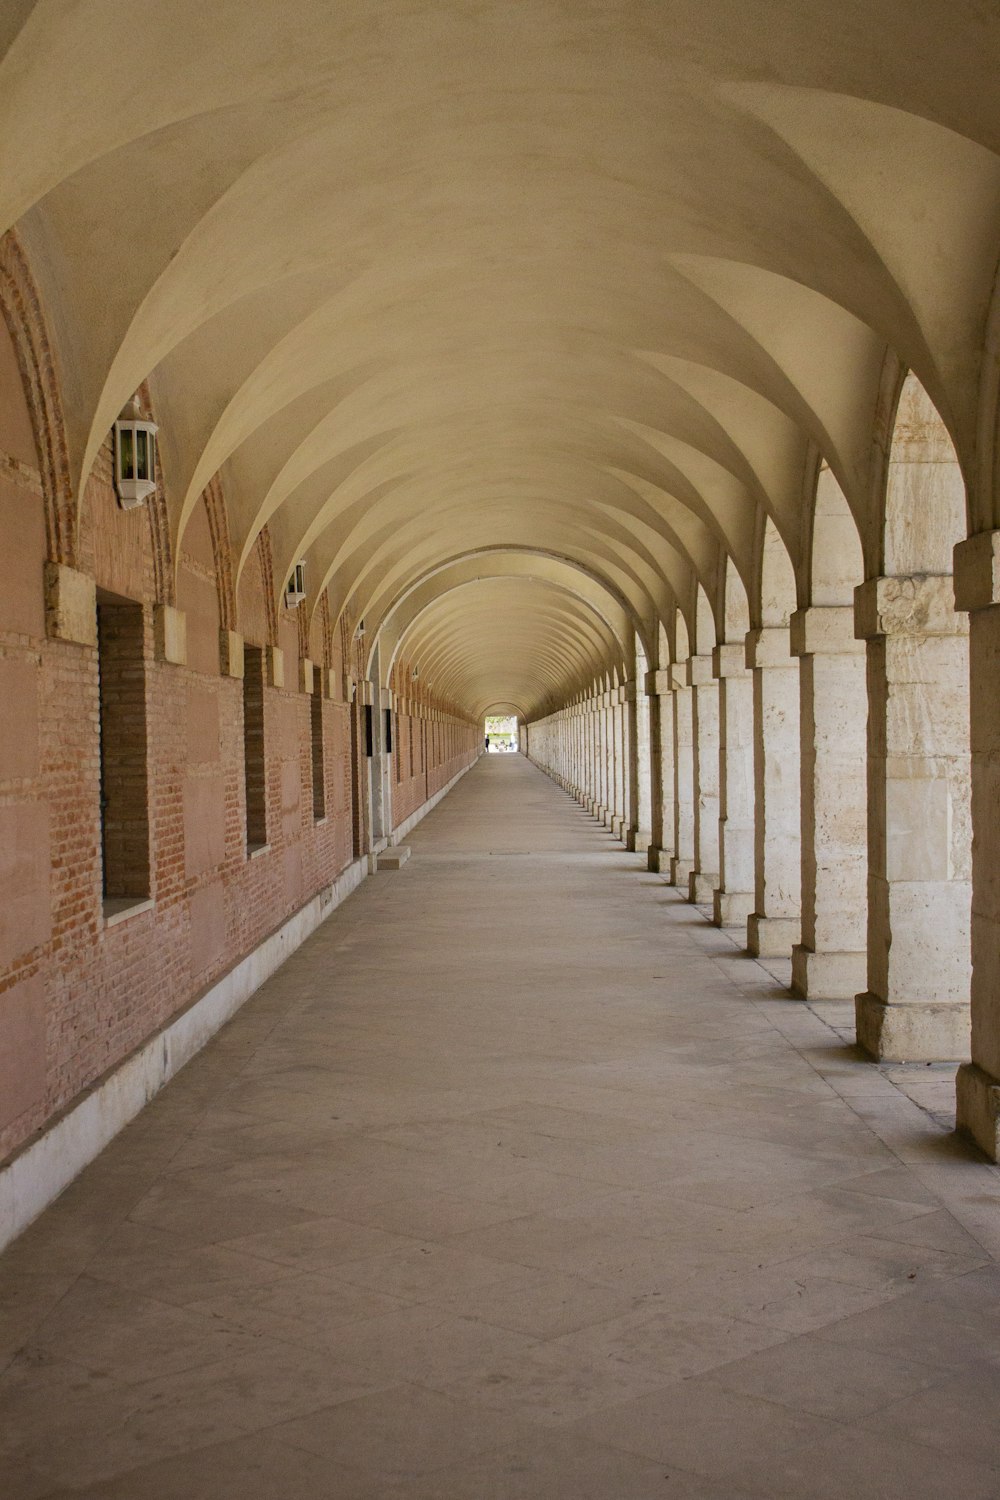 a long hallway with arches and a clock on the wall